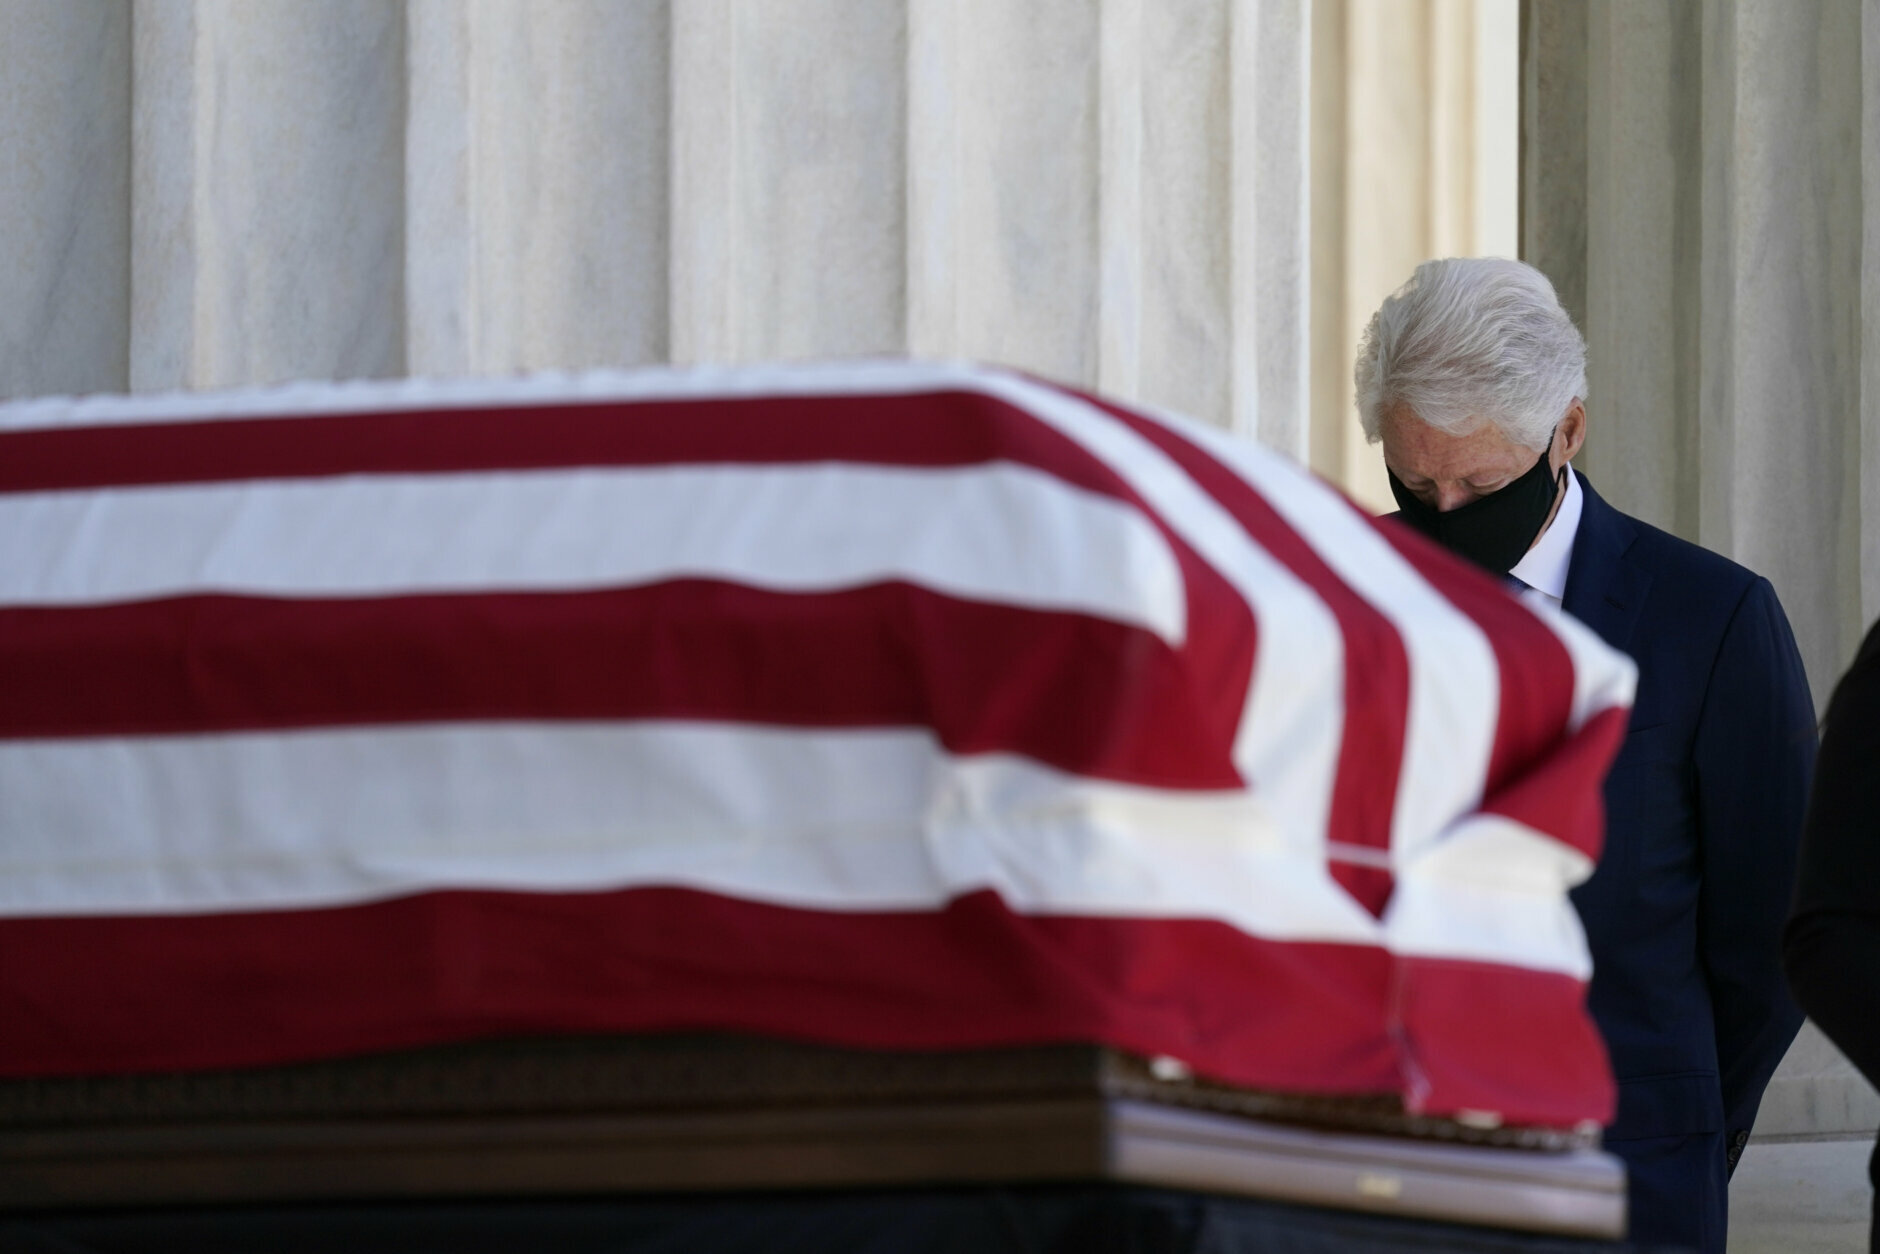 Former President Bill Clinton pays respects as Justice Ruth Bader Ginsburg lies in repose under the Portico at the top of the front steps of the U.S. Supreme Court building on Wednesday, Sept. 23, 2020, in Washington. Ginsburg, 87, died of cancer on Sept. 18. (AP Photo/Alex Brandon, Pool)